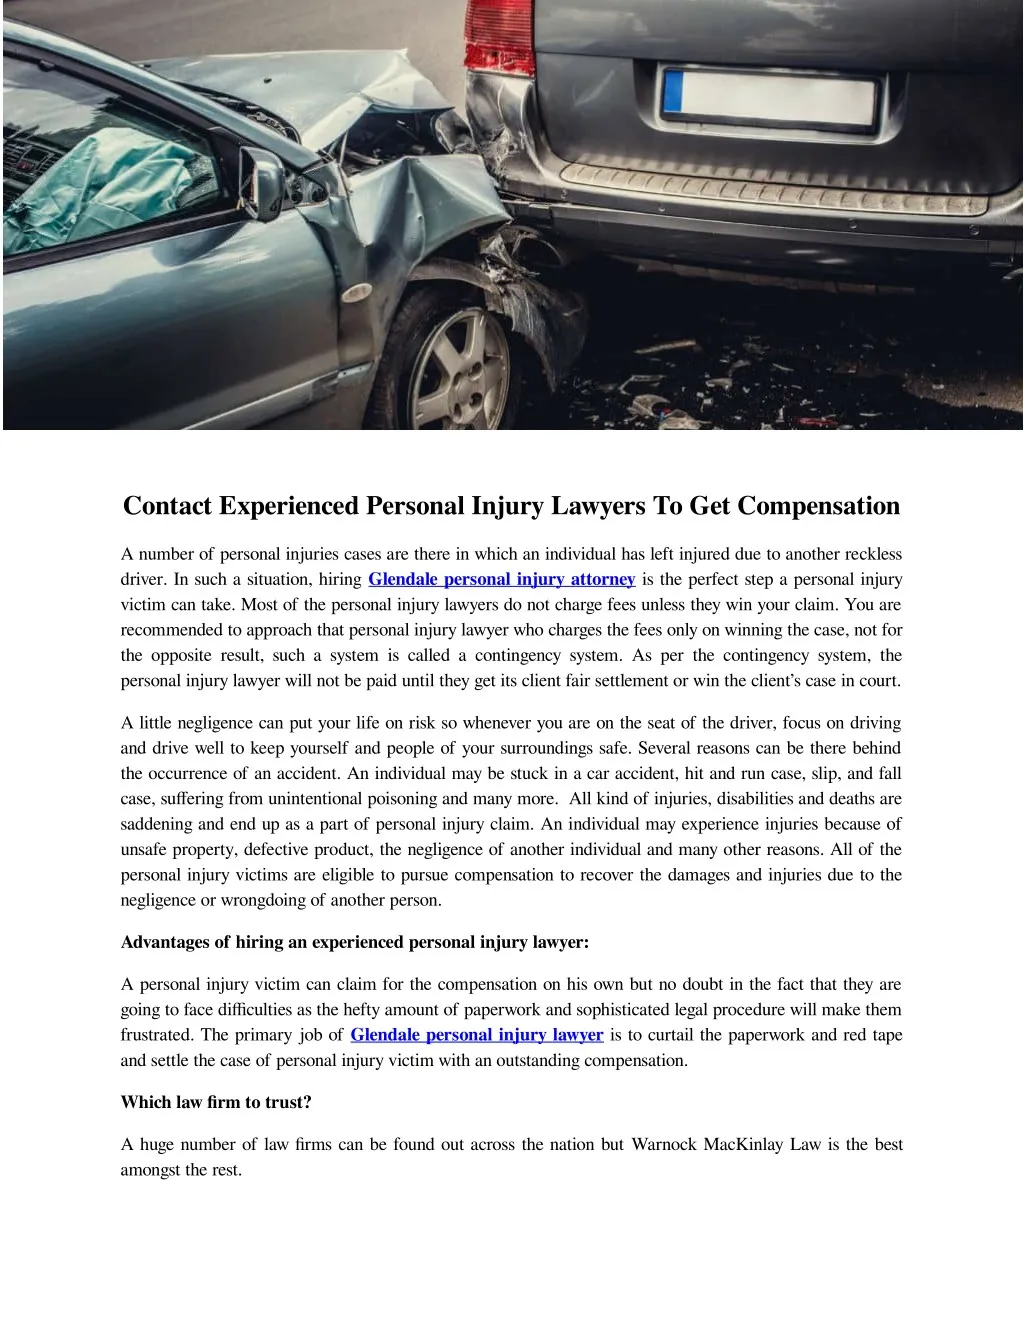 contact experienced personal injury lawyers